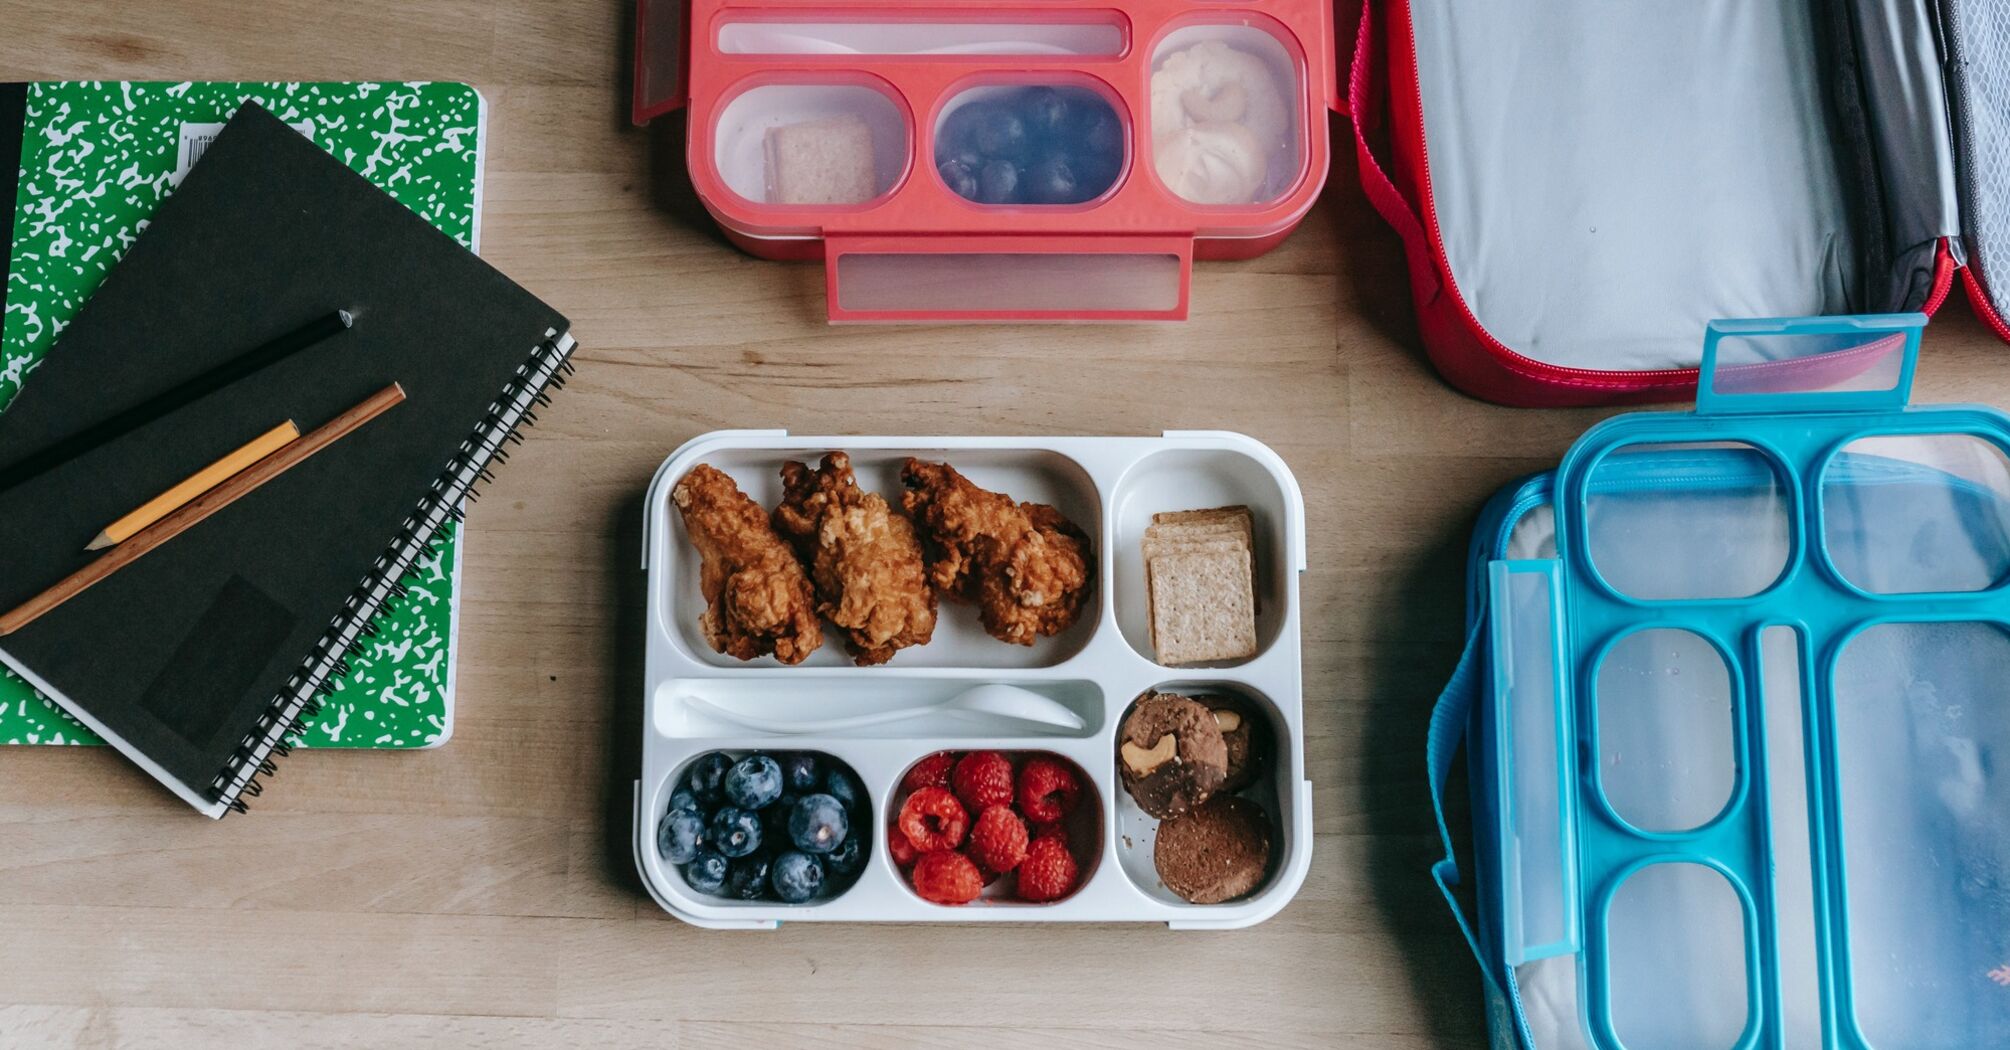 Which one is better: school lunches or home-cooked meals